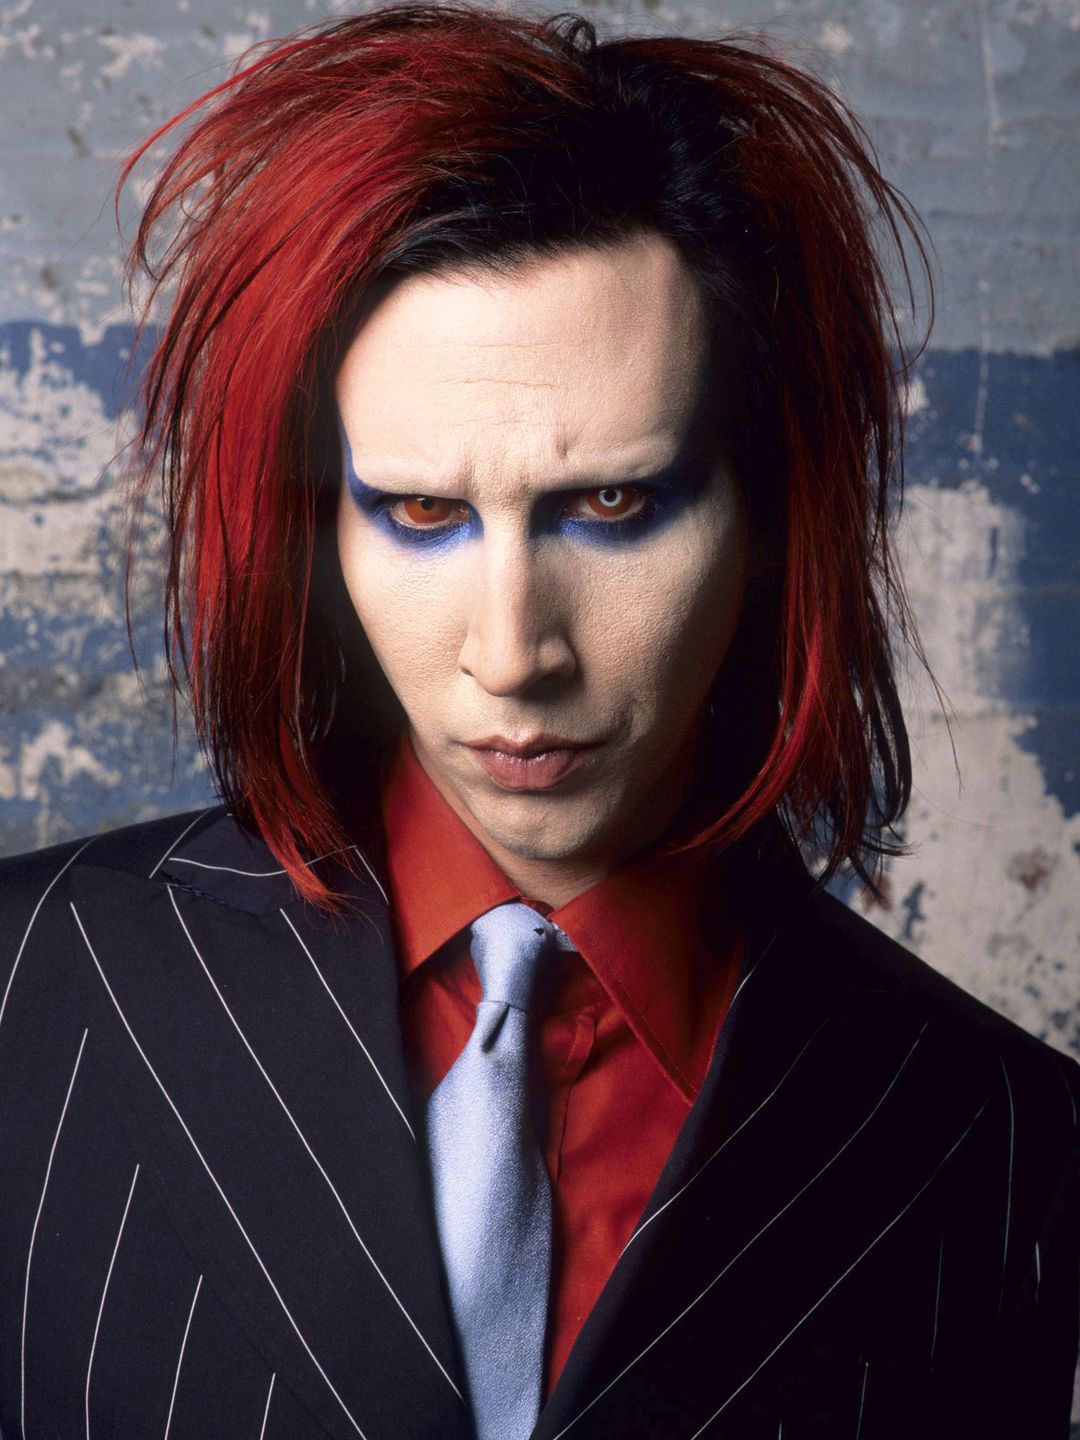 Marilyn Manson who is his father